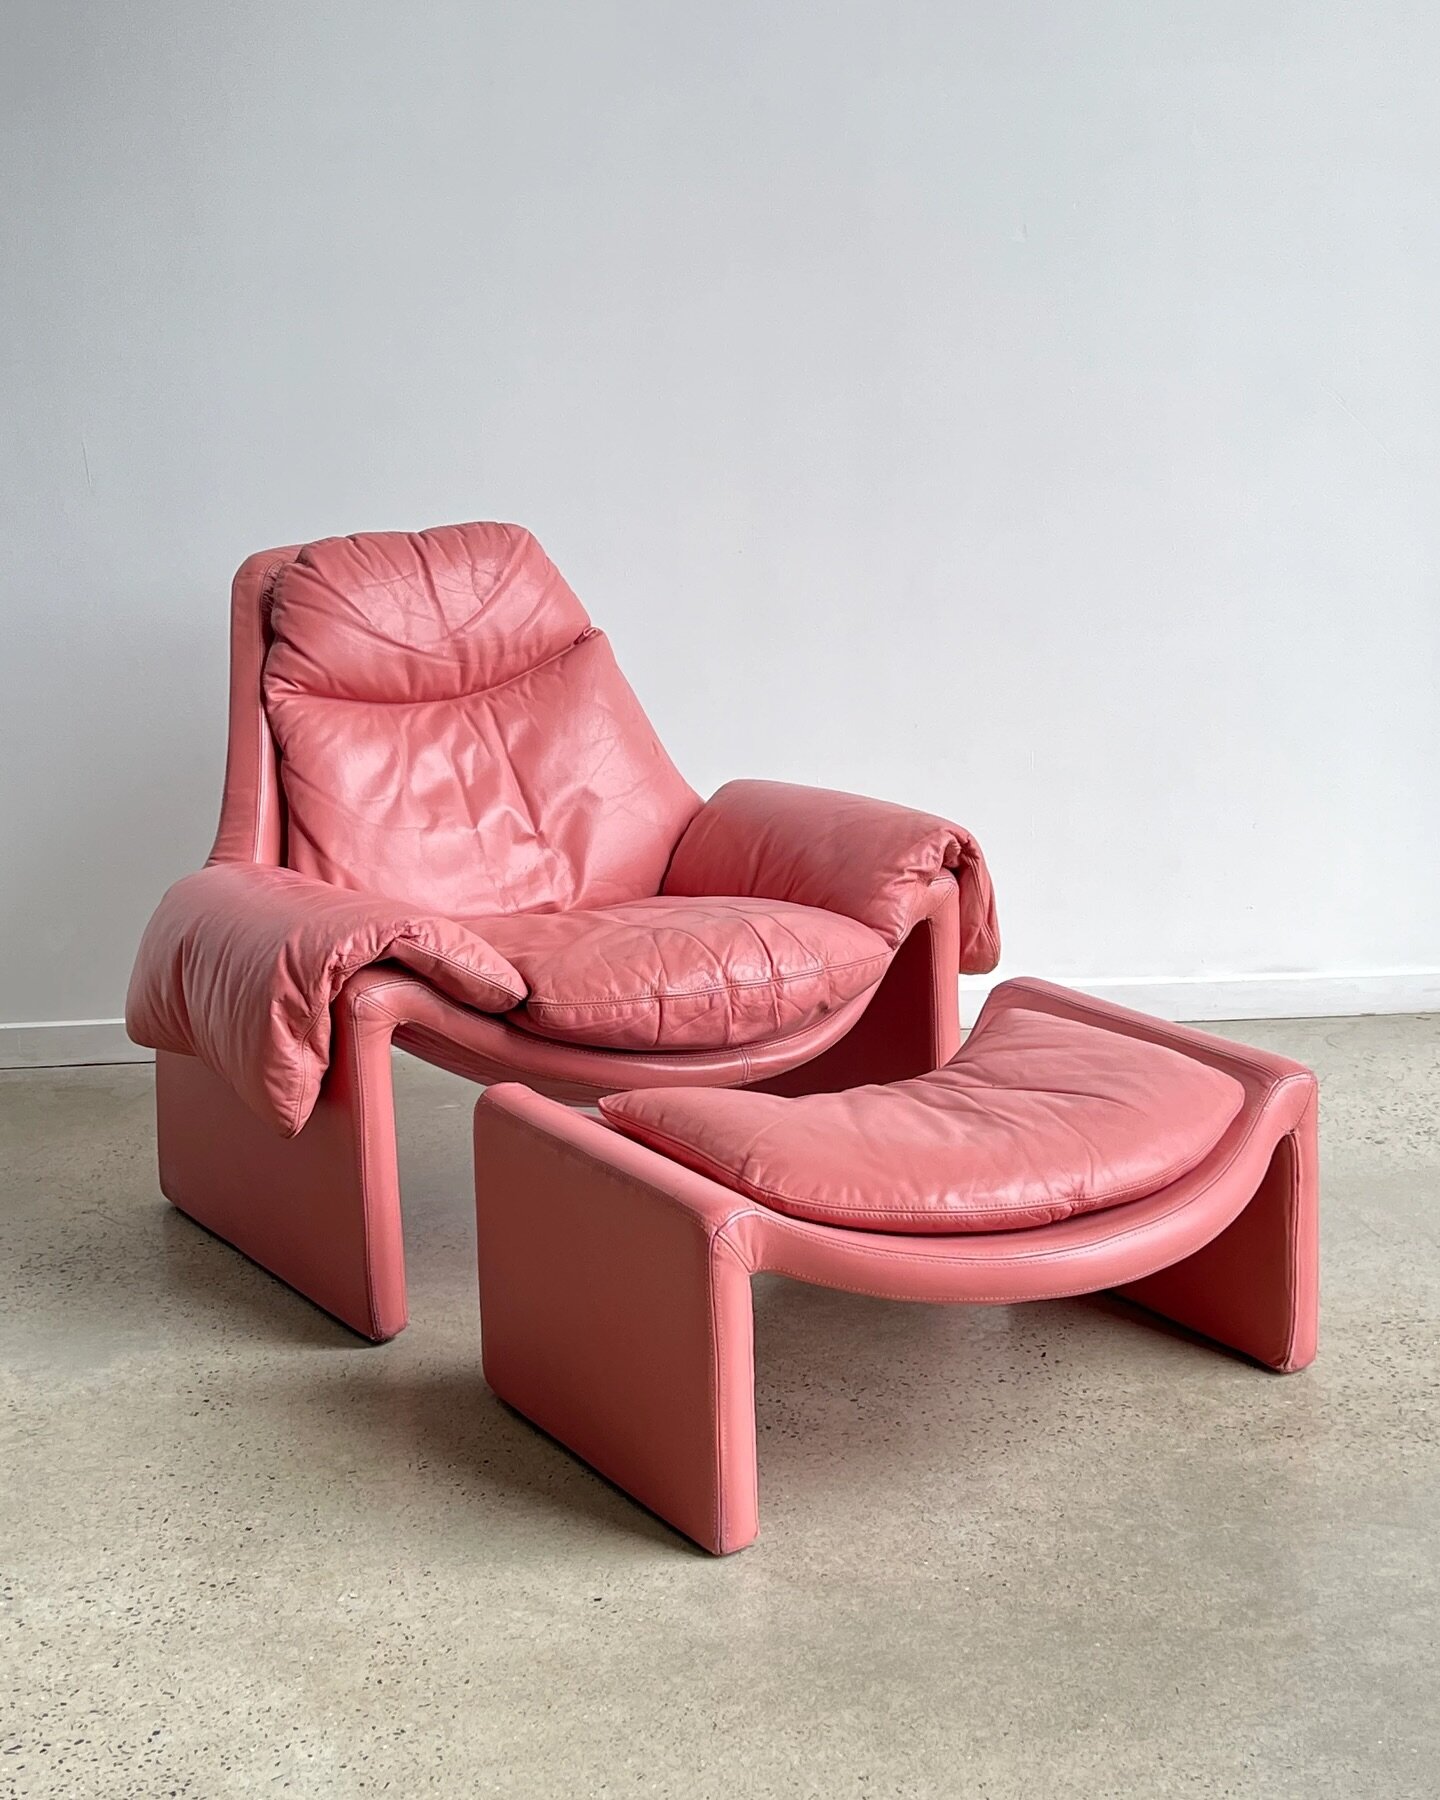 LOVE at first sight with this beauty!

🩷 The P60 Pink Leather Chair by Vittorio Introini for Saporiti Italia, designed in 1962!

🩷 During the 1960s and 1970s, Introini became famous for his chair and sofa designs, which were produced by Italian com